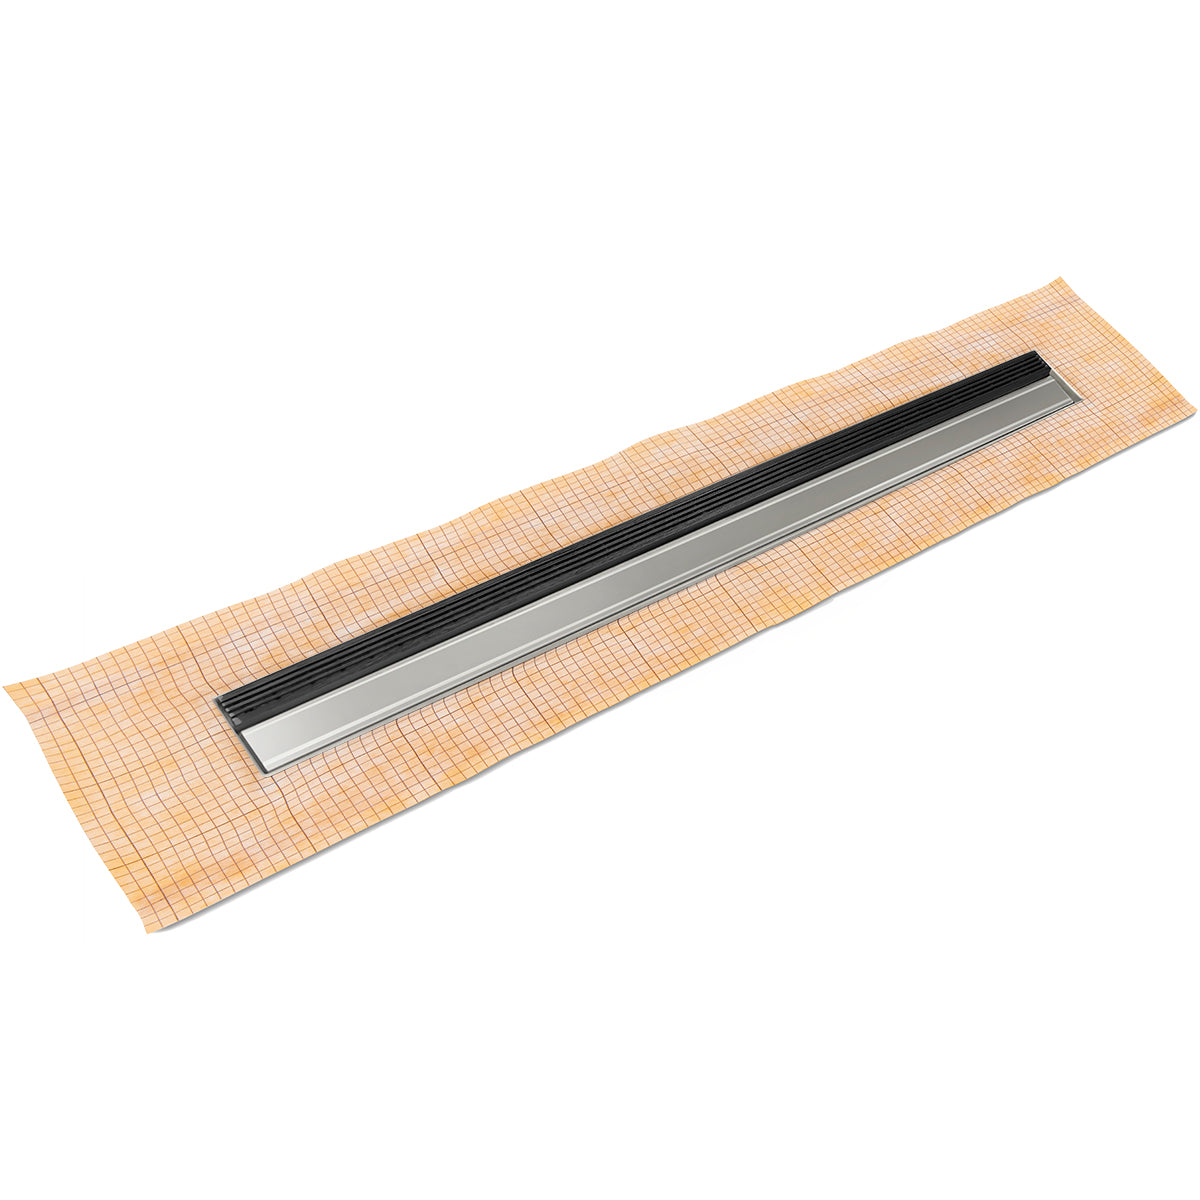 Infinity Drain 42" FCS Series Schluter-Kerdi - Fixed Flange Linear Drain Kit with 1" Wedge Wire Grate